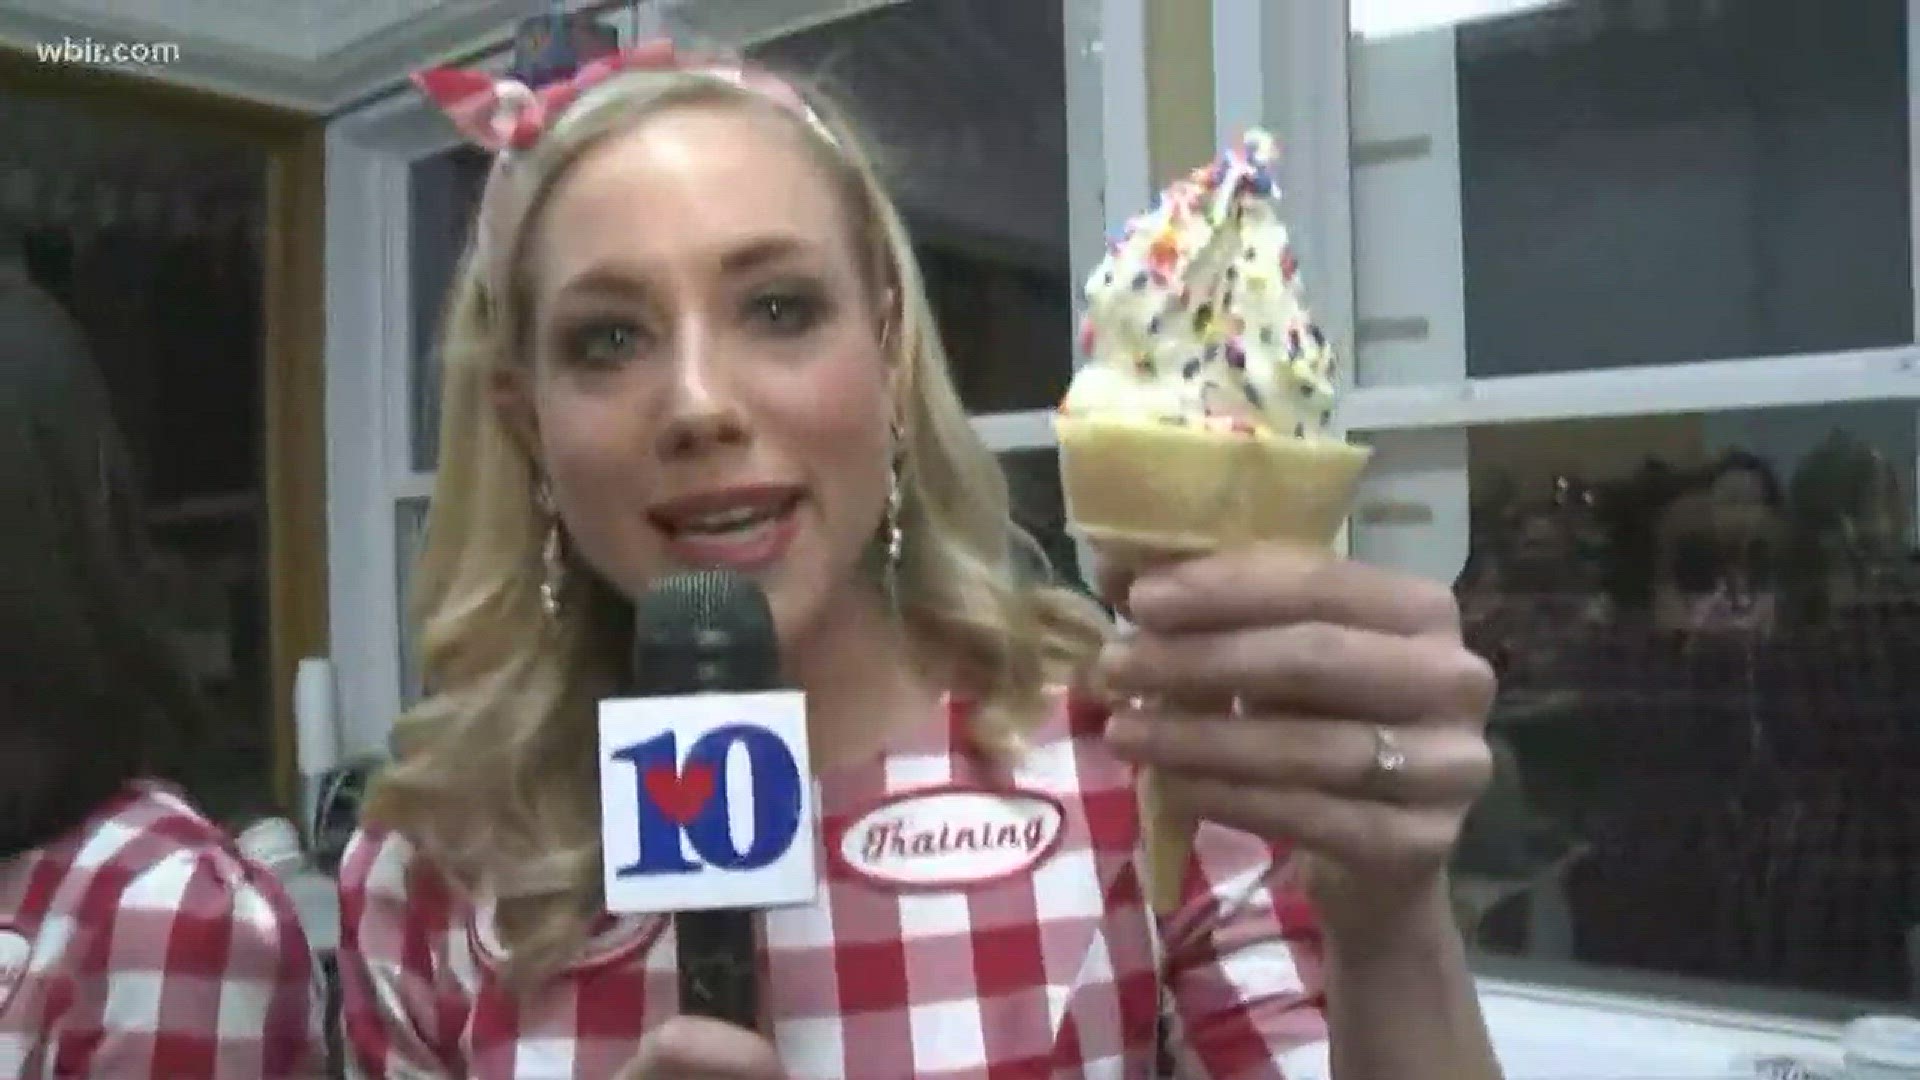 Cruz Farms offered free ice cream for Dolly's birthday!